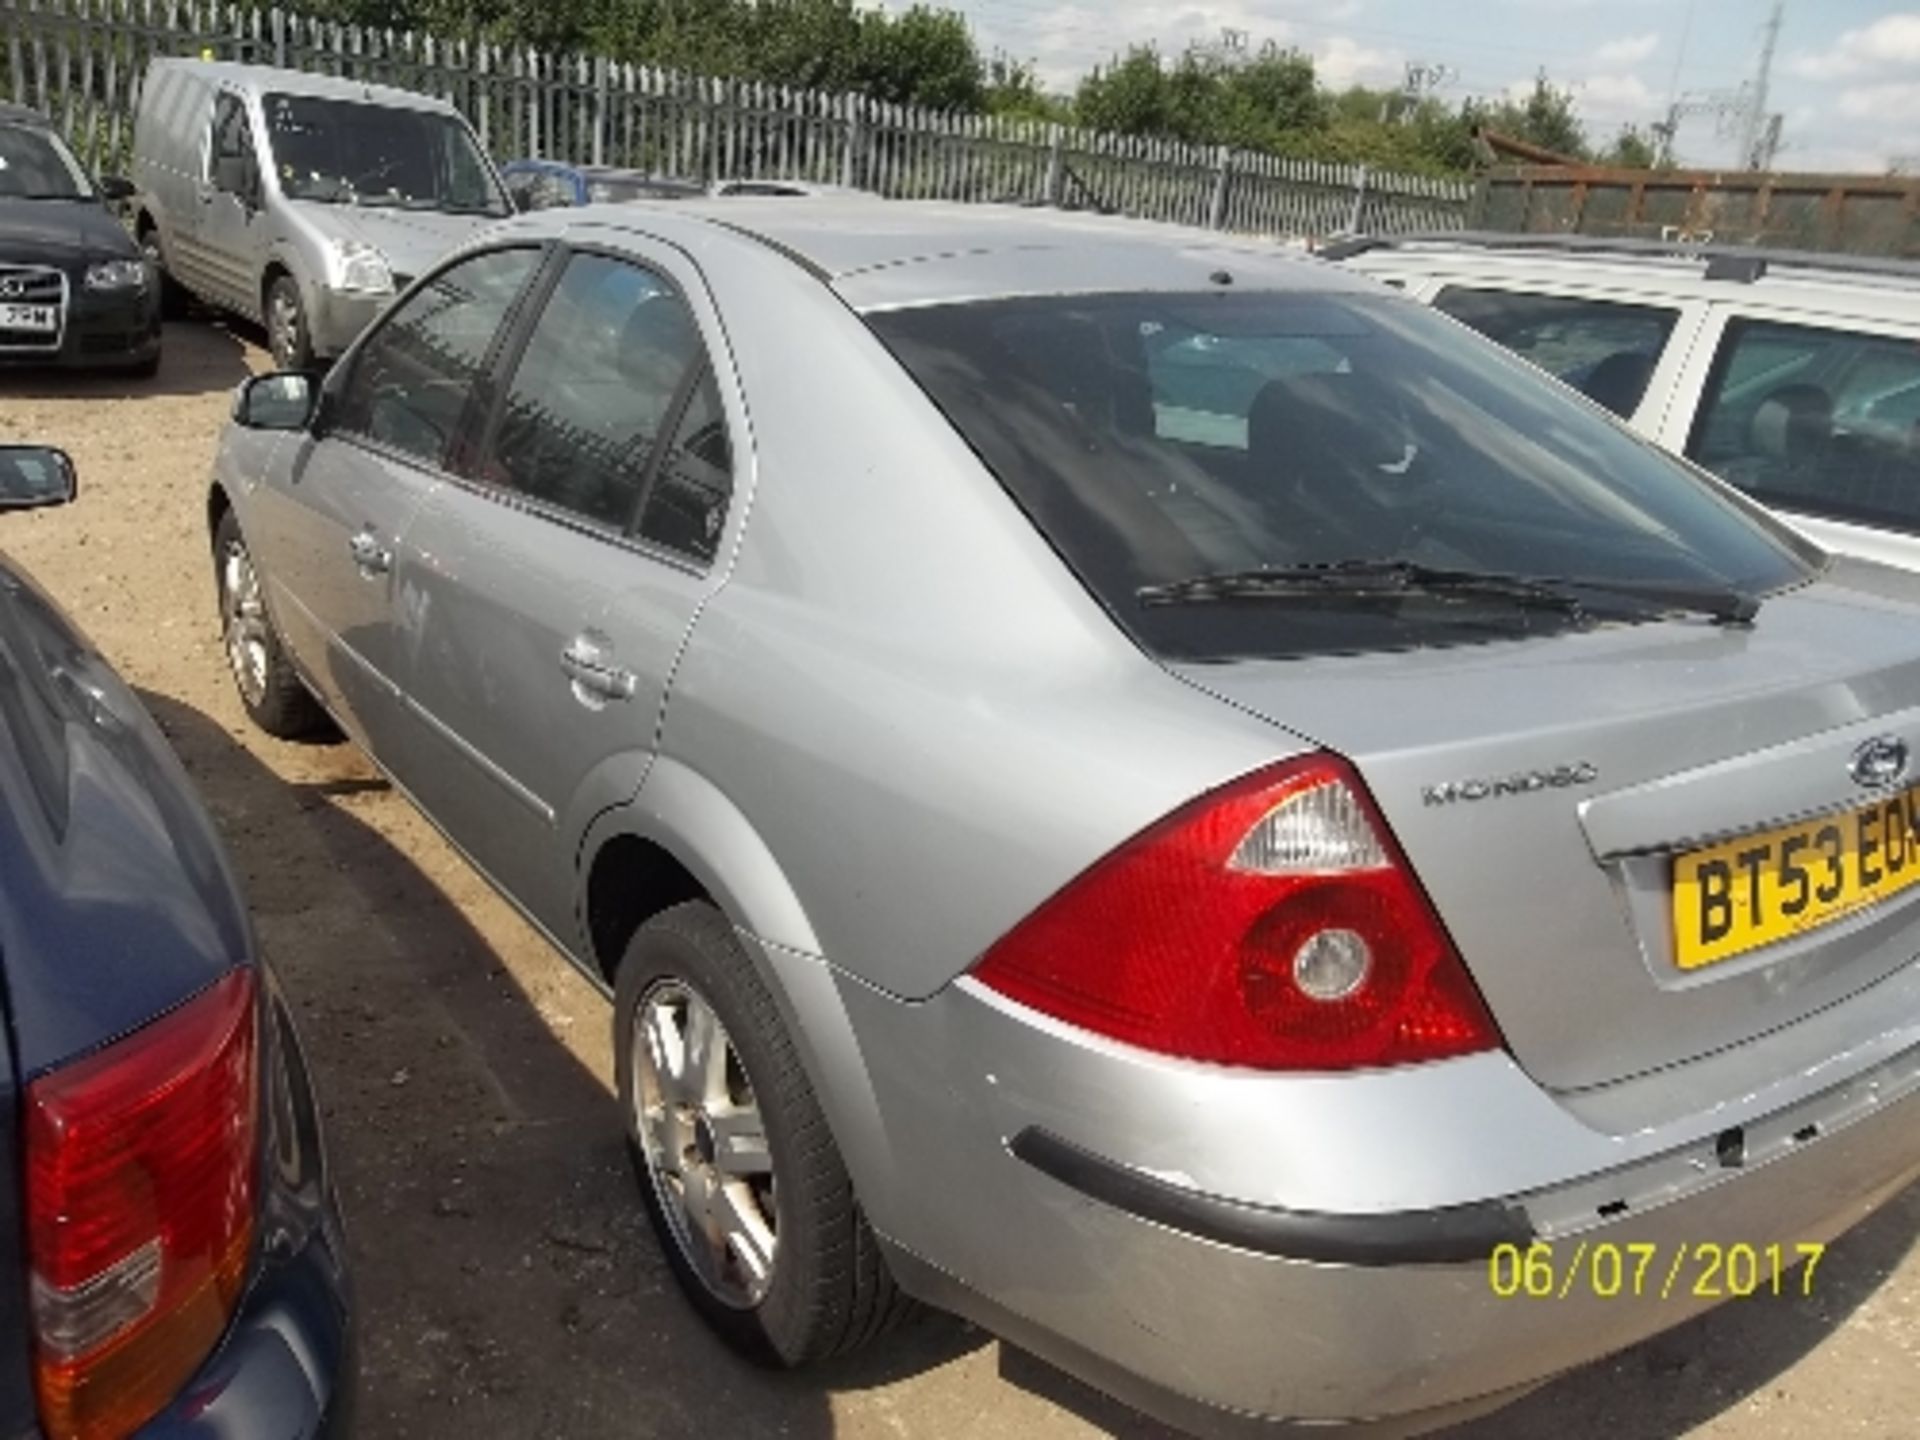 Ford Mondeo Ghia TDCI - BT53 EOM Date of registration: 26.11.2003 1998cc, diesel, manual, silver - Image 4 of 4